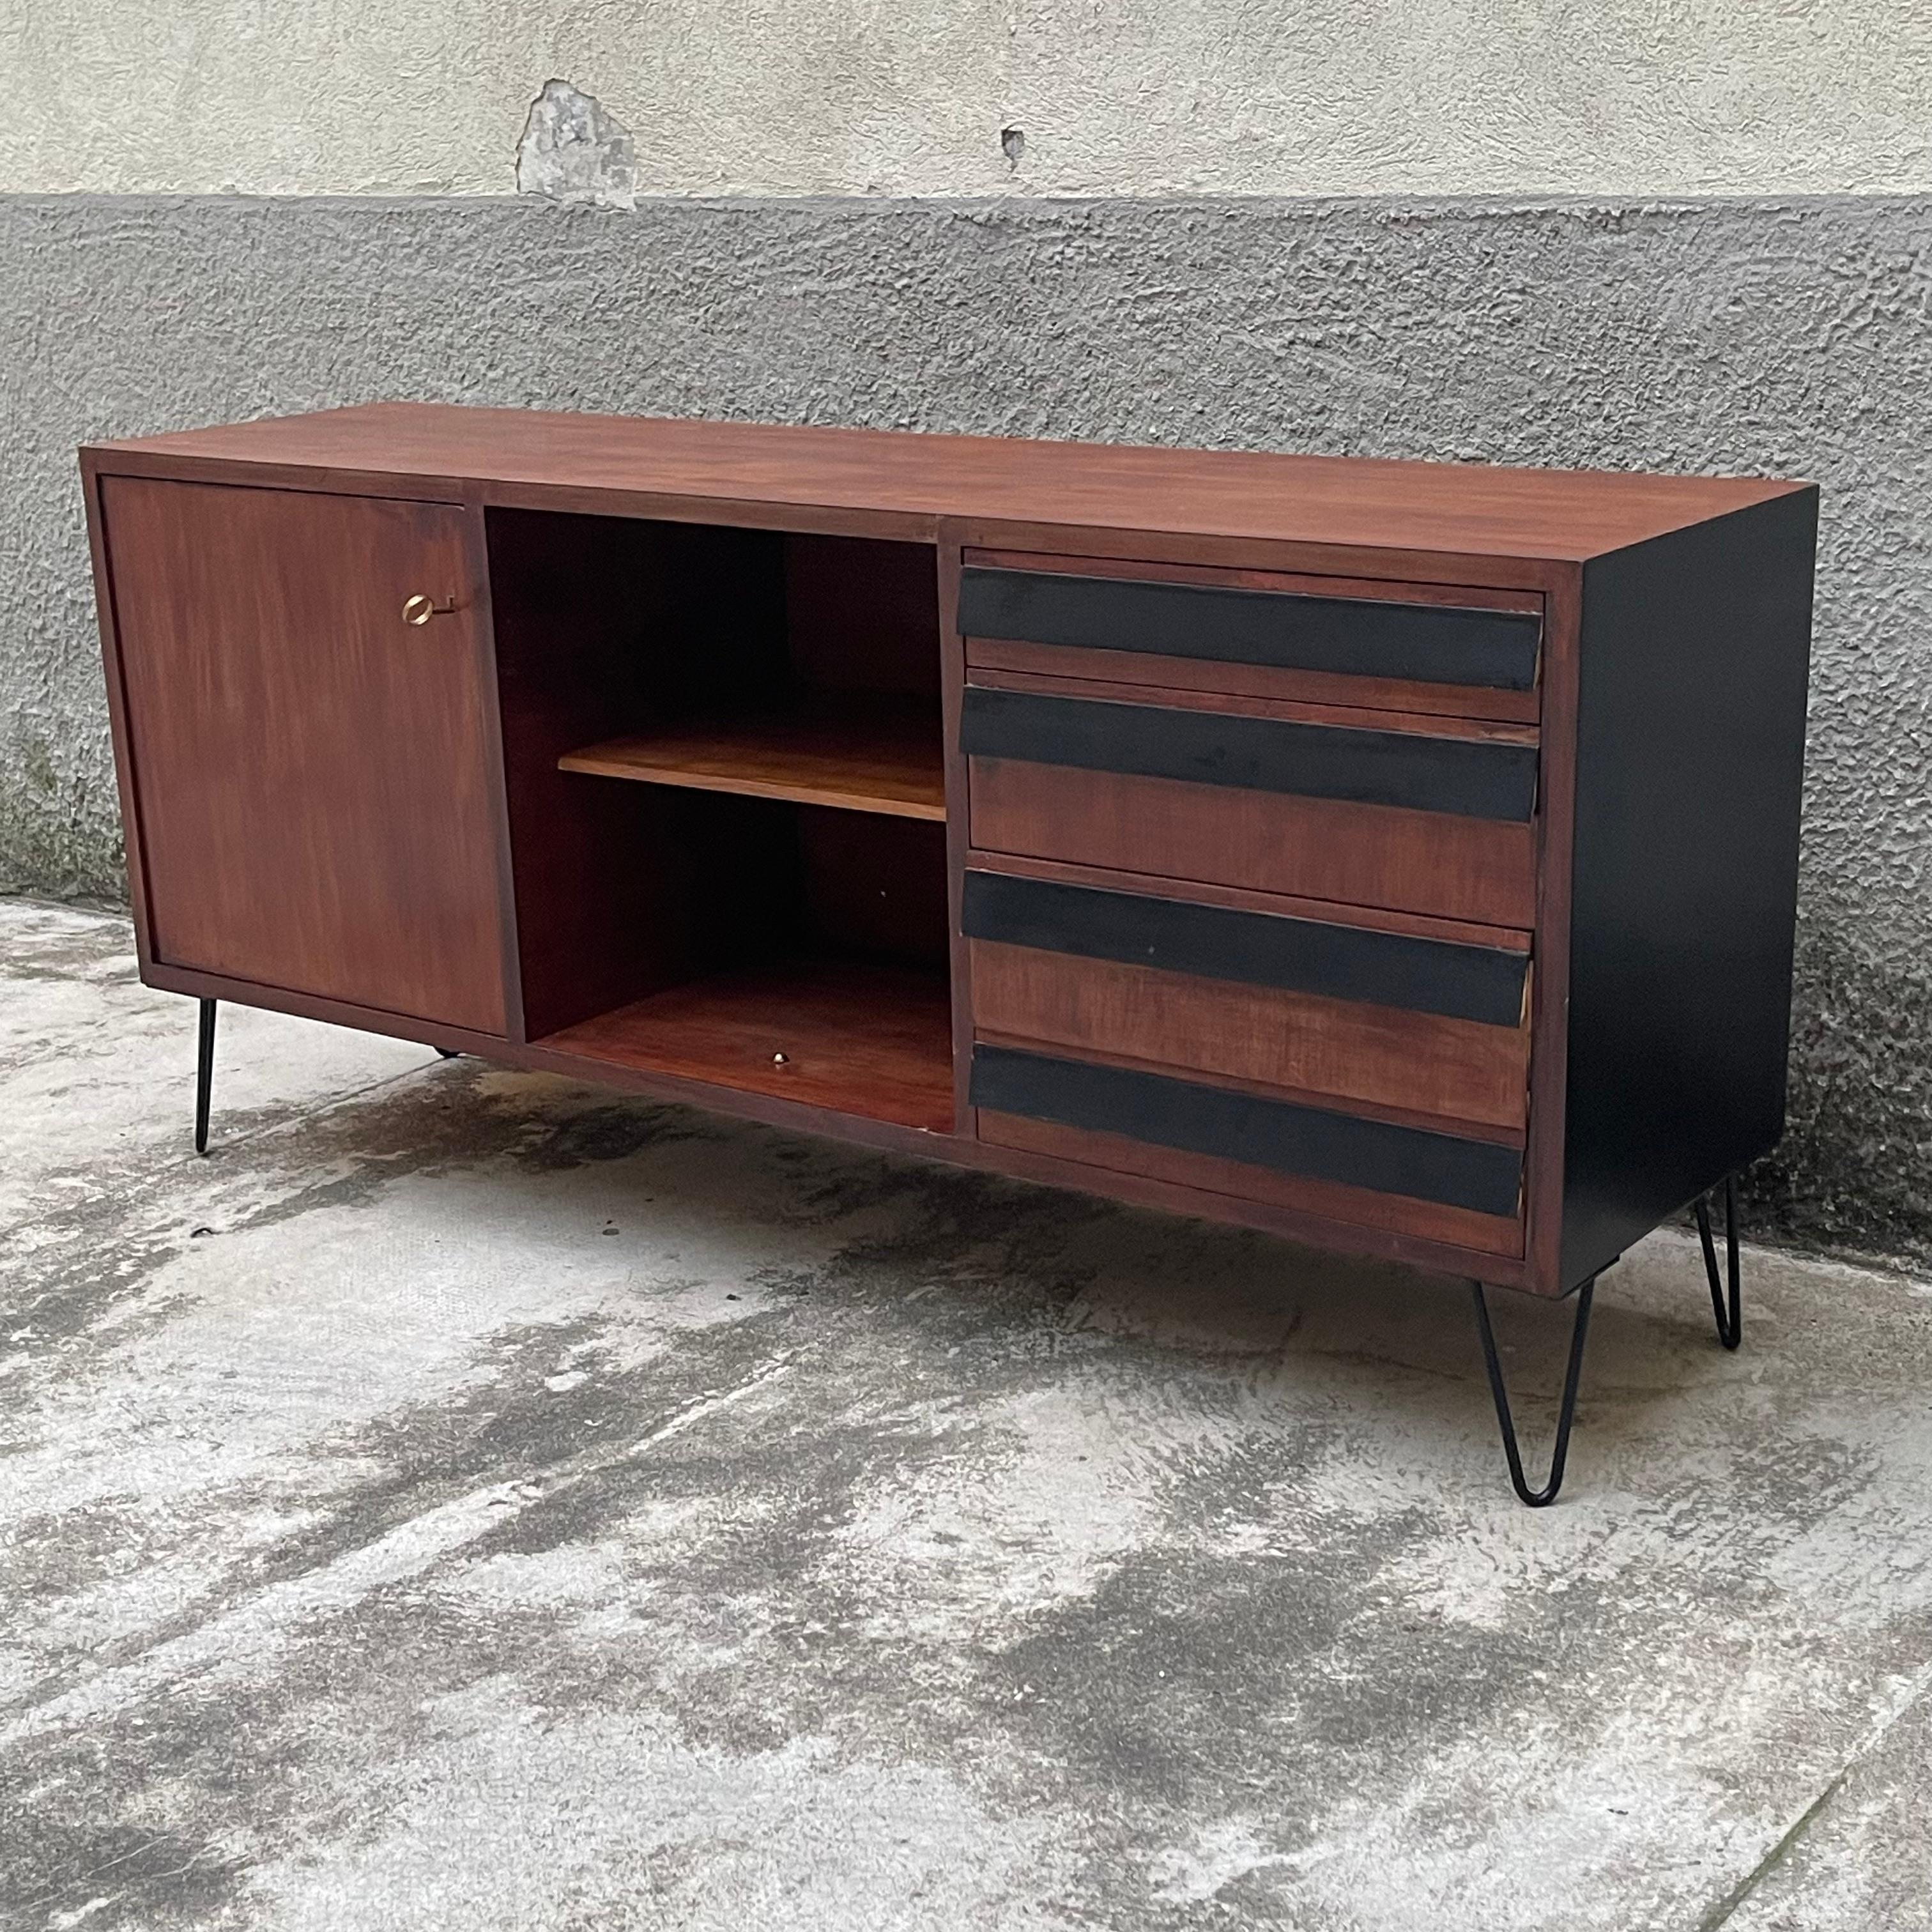 This mid-century vintage sideboard combines mid-20th century Italian style with a beautiful and practical design that is both simple and functional. Ample space and easy-access drawers make this cabinet beautiful and practical.
Its painted metal